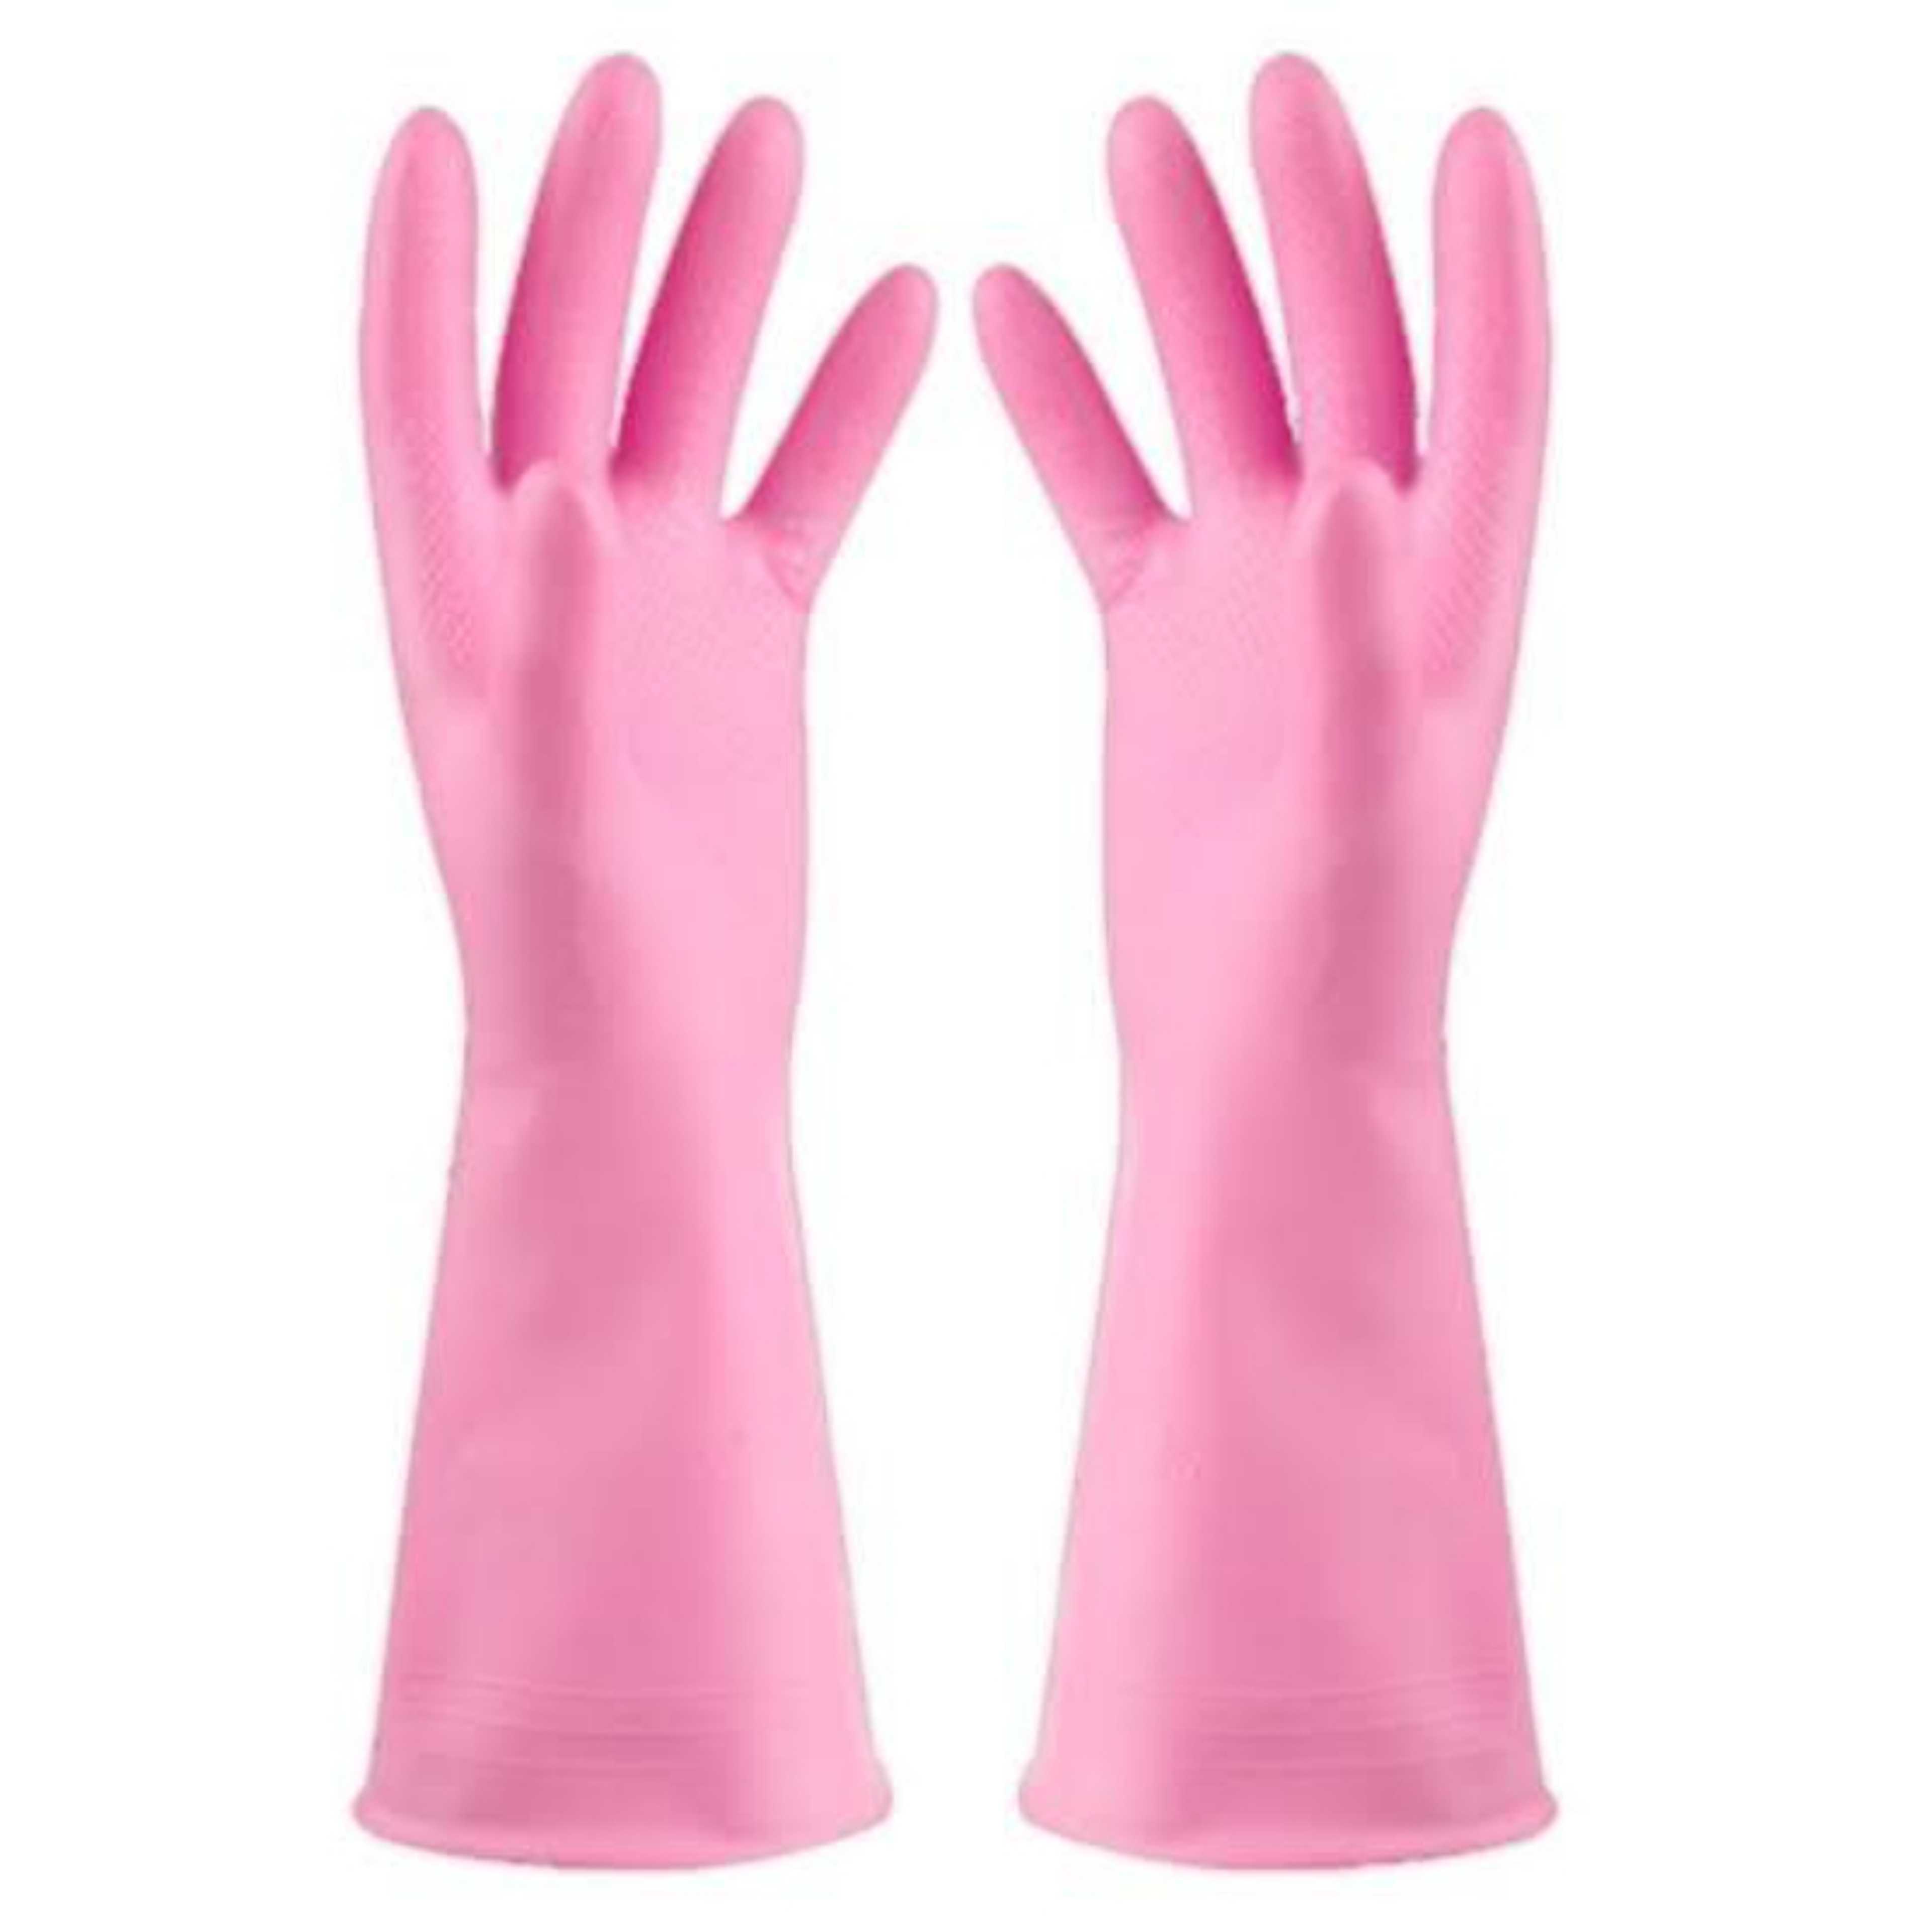 NDM Kitchen Dish Washing And Cleaning Gloves